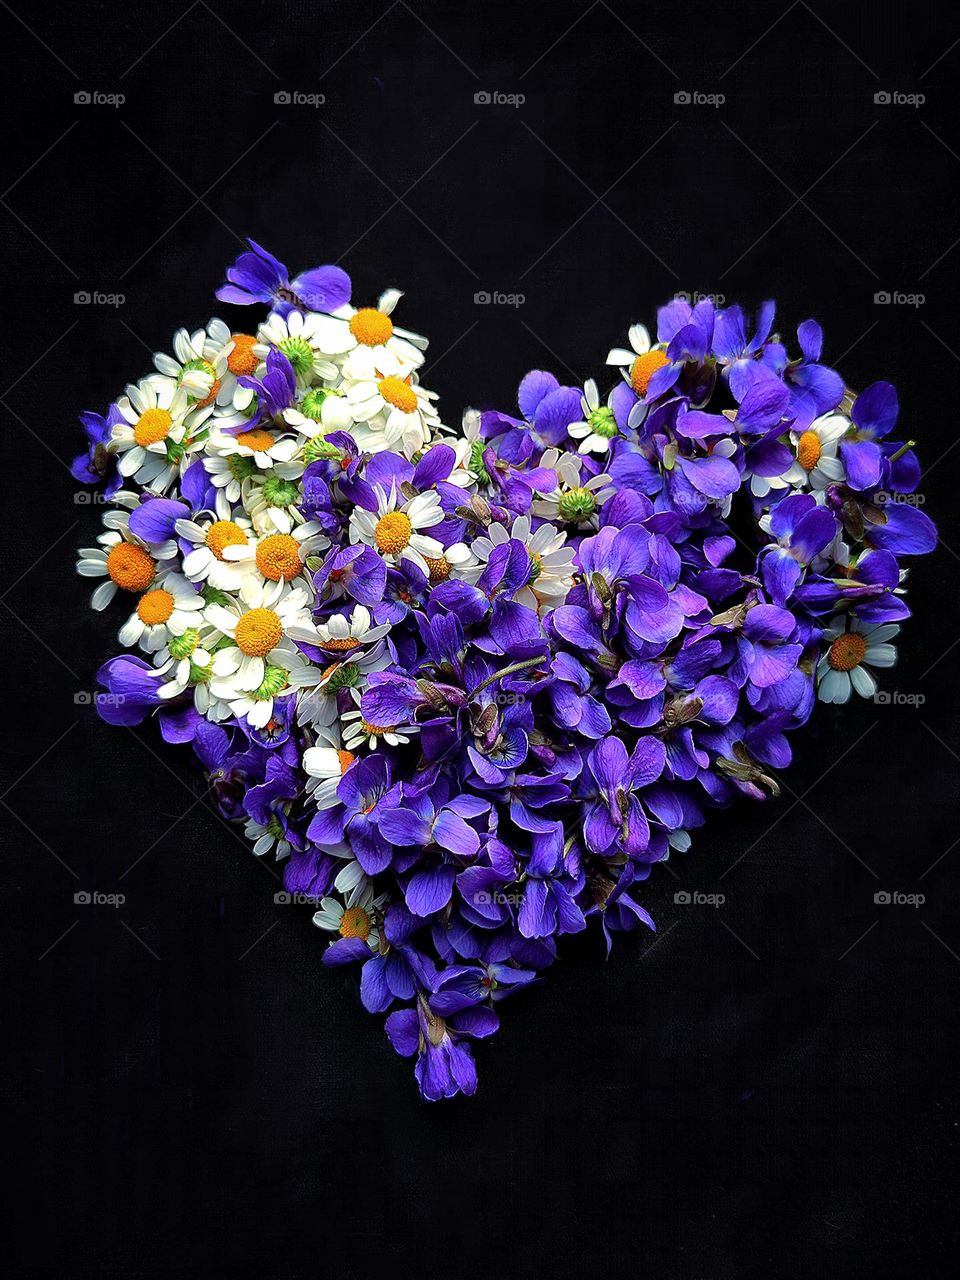 April mood. Wildflowers. Heart of white chamomile flowers and dark purple violet flowers on a black background